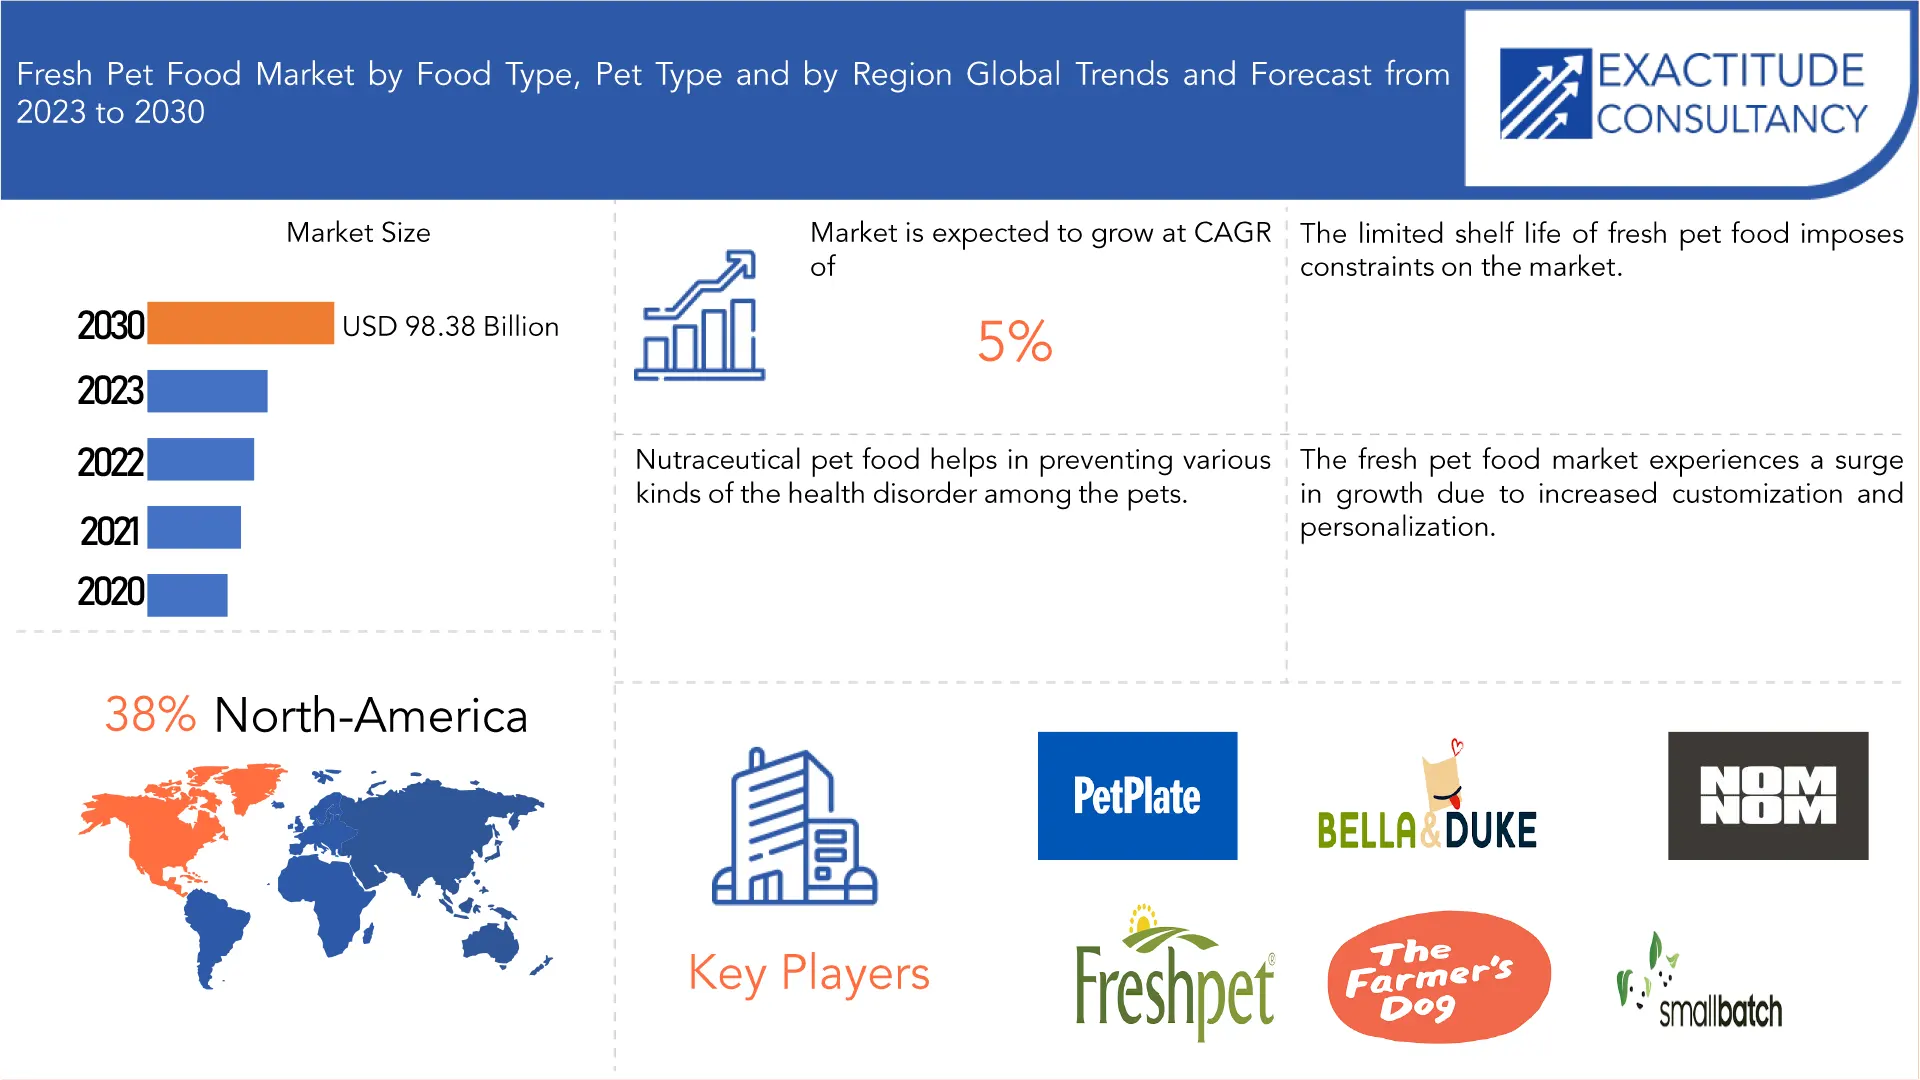 What Are the Key Drivers of Growth in the Global Fresh Dog Food Market?